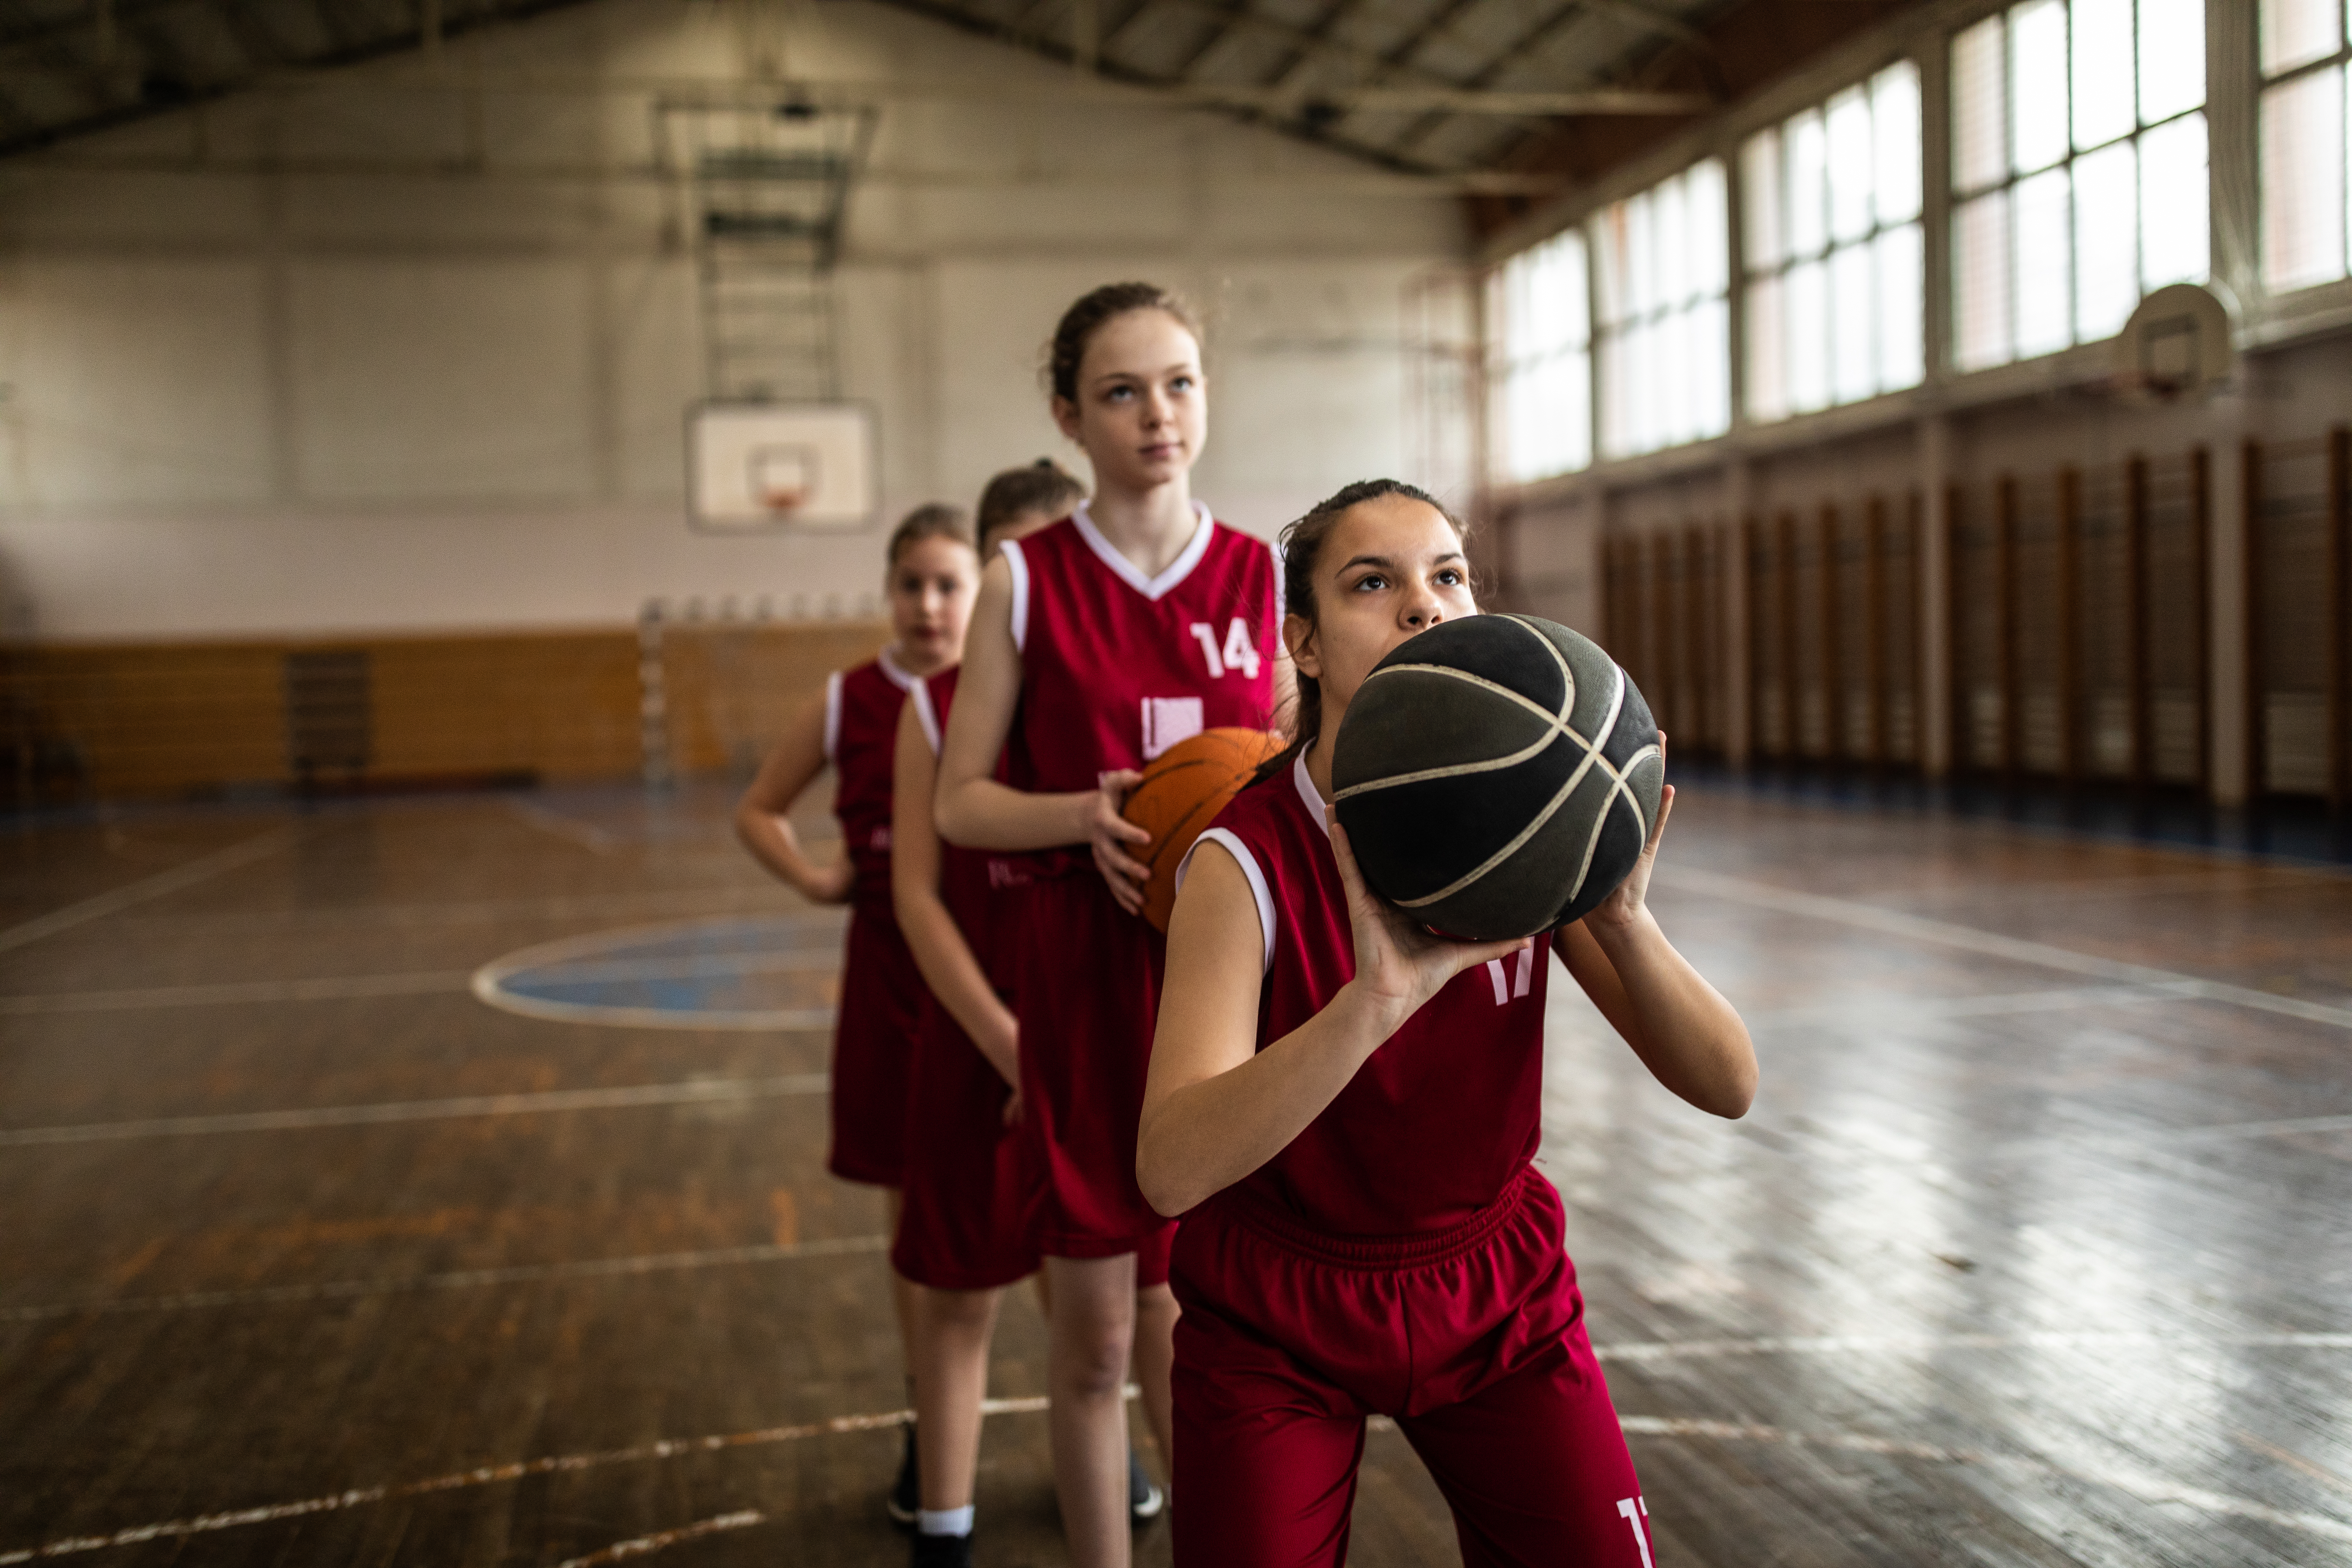 Determined female basketball player practicing free throws at school gym, playmates standing in line behind her